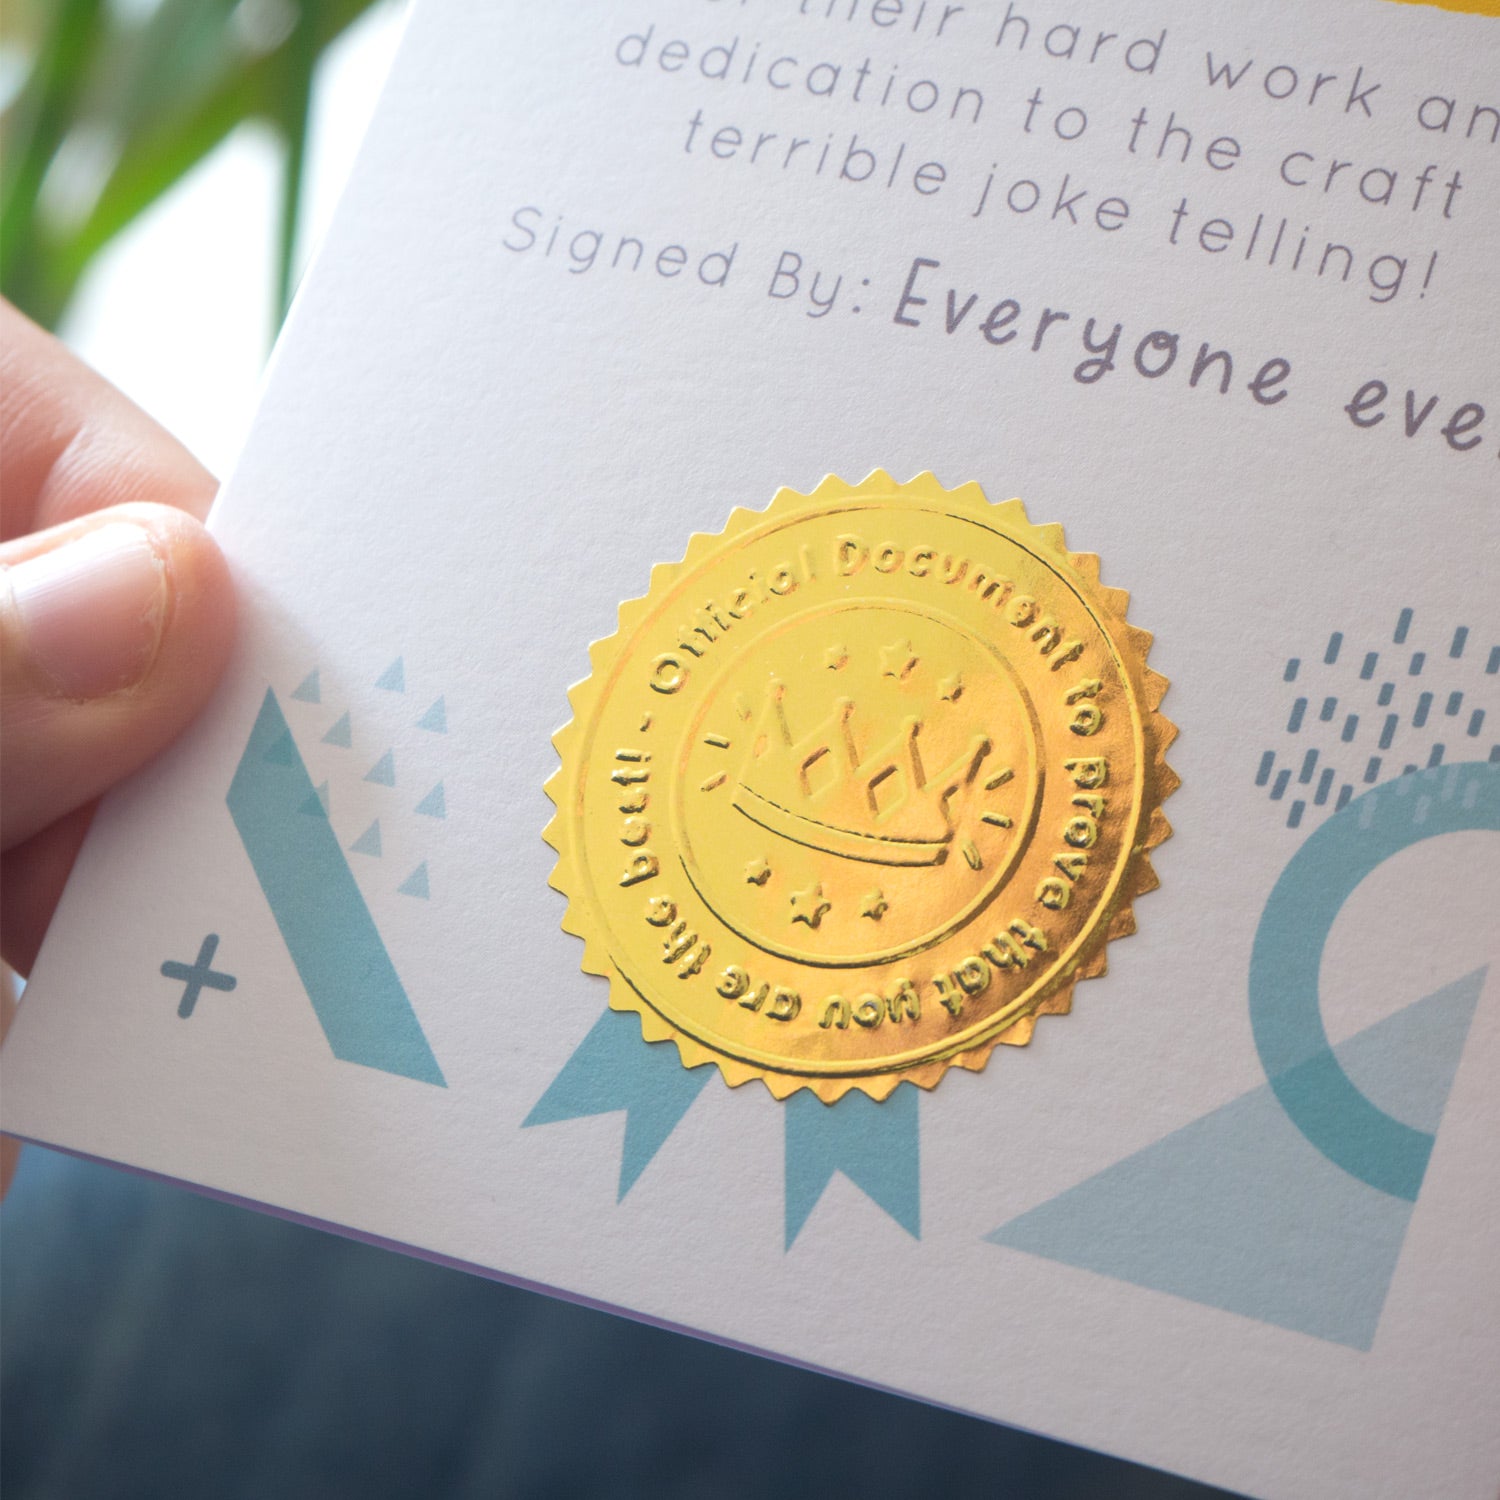 A close up of the gold shiny stamp!